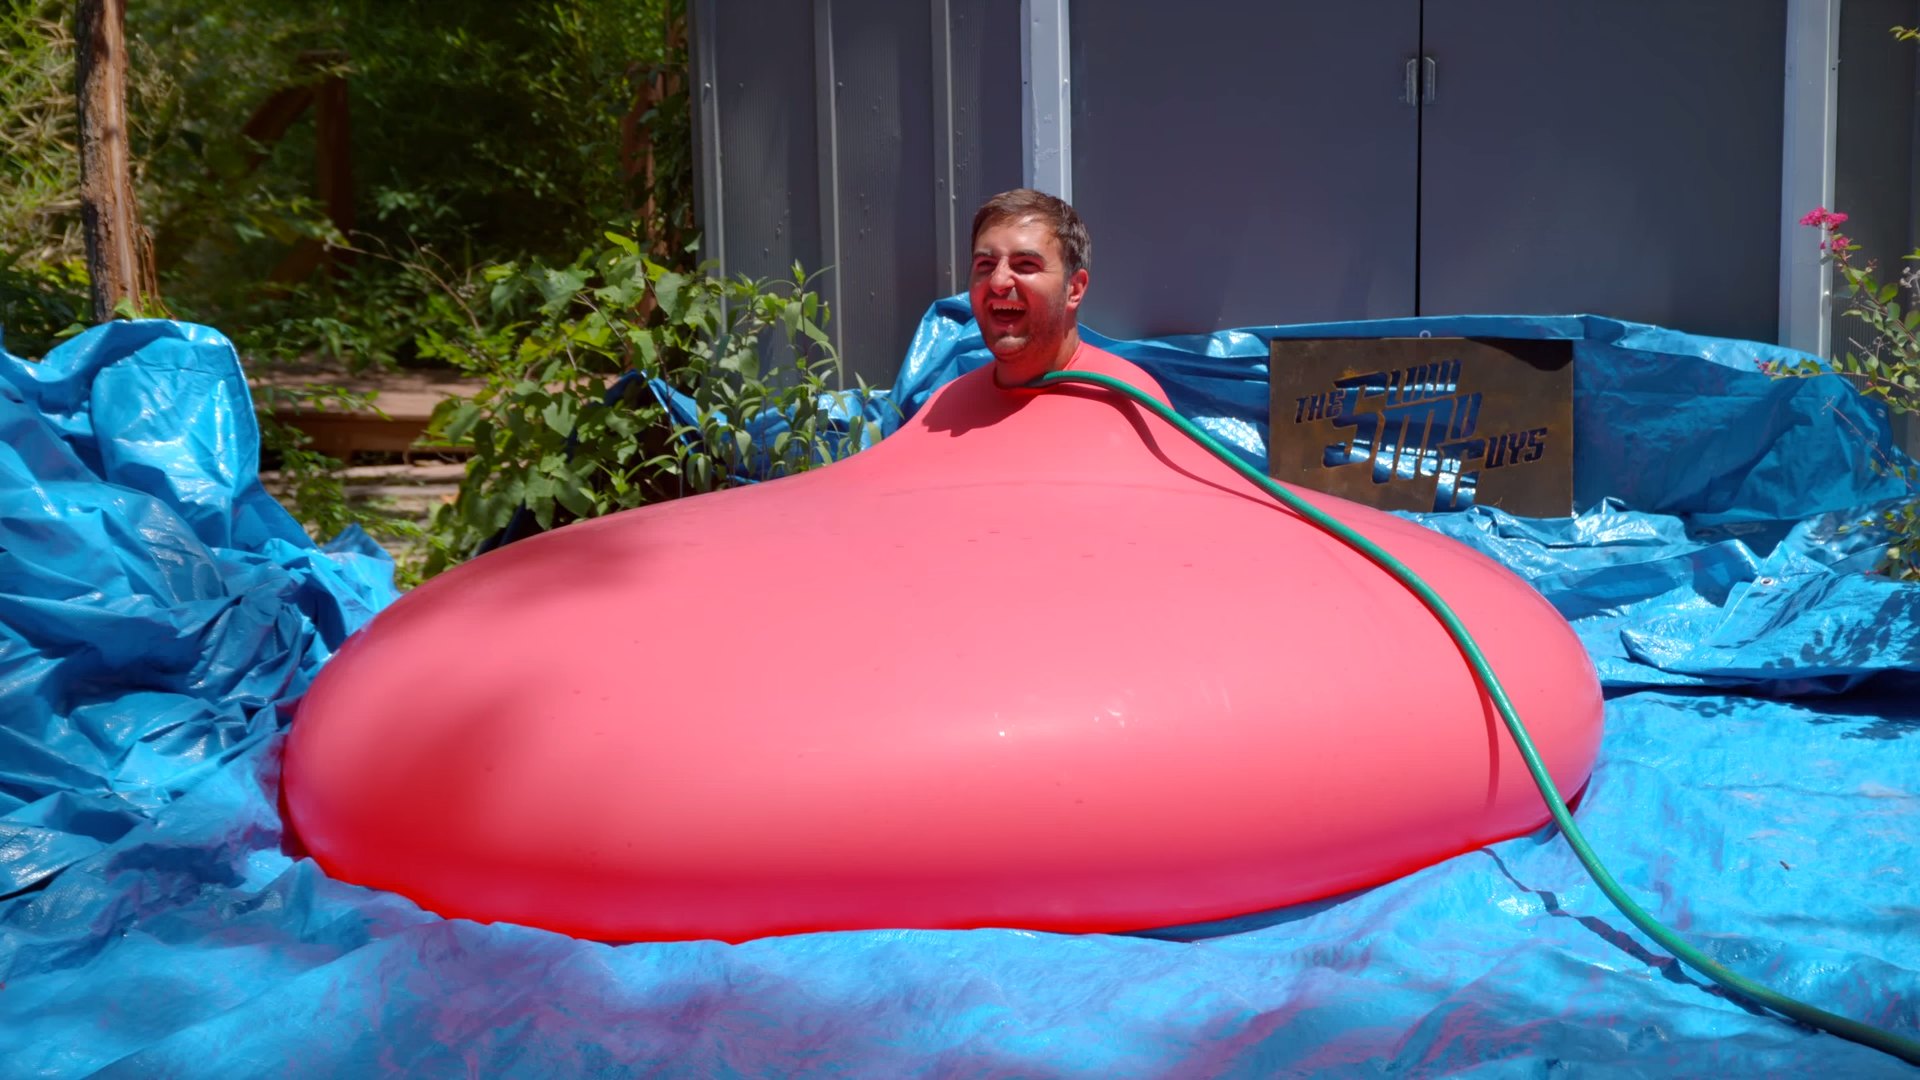 Watch A 6-Foot Water Balloon Pop In Slow Motion With A 6-Foot Man Stuffed I...